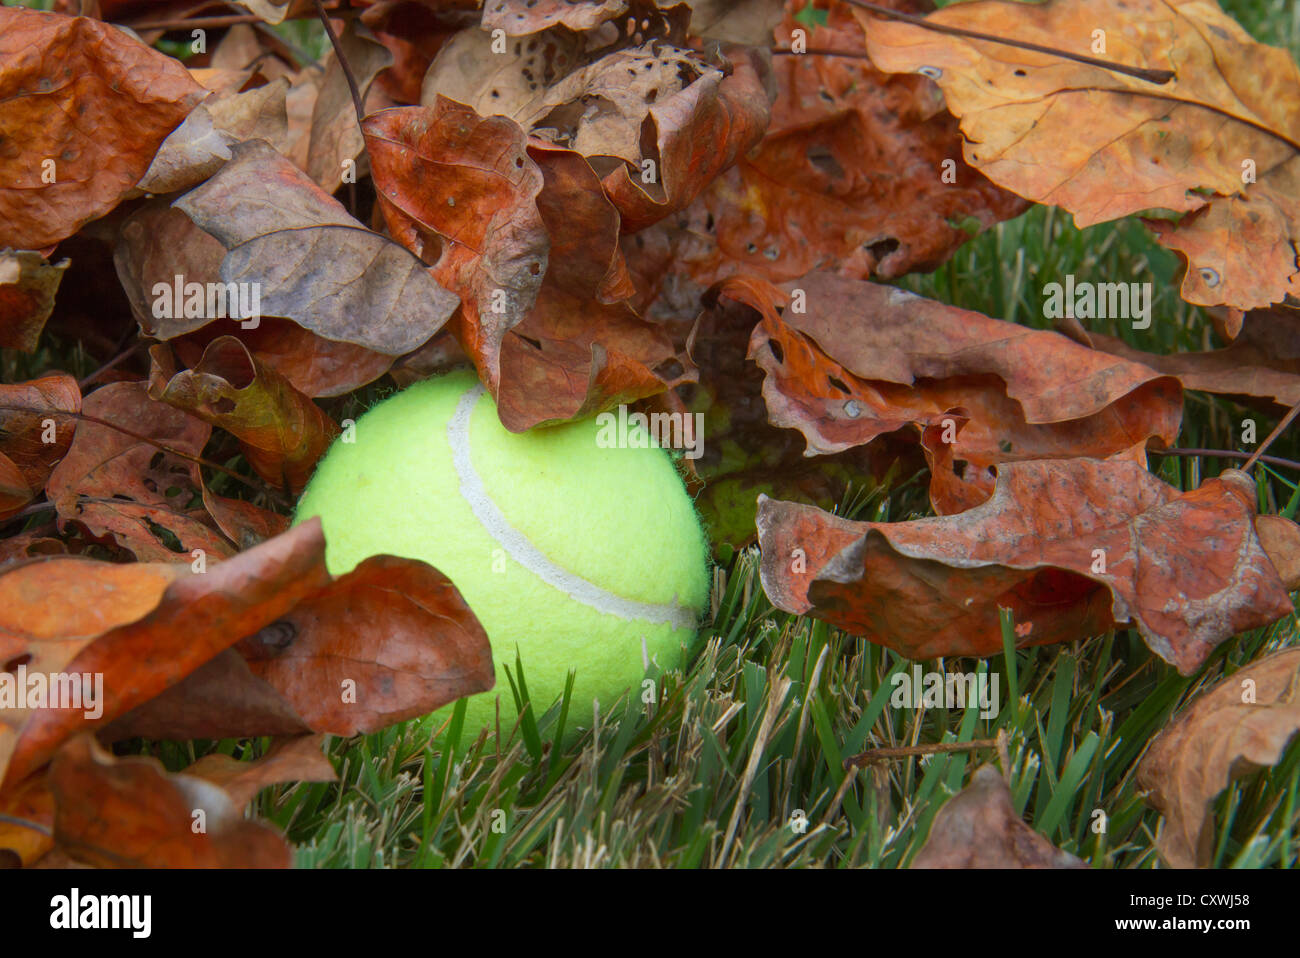 A tennis ball lost in dry leaves. Stock Photo